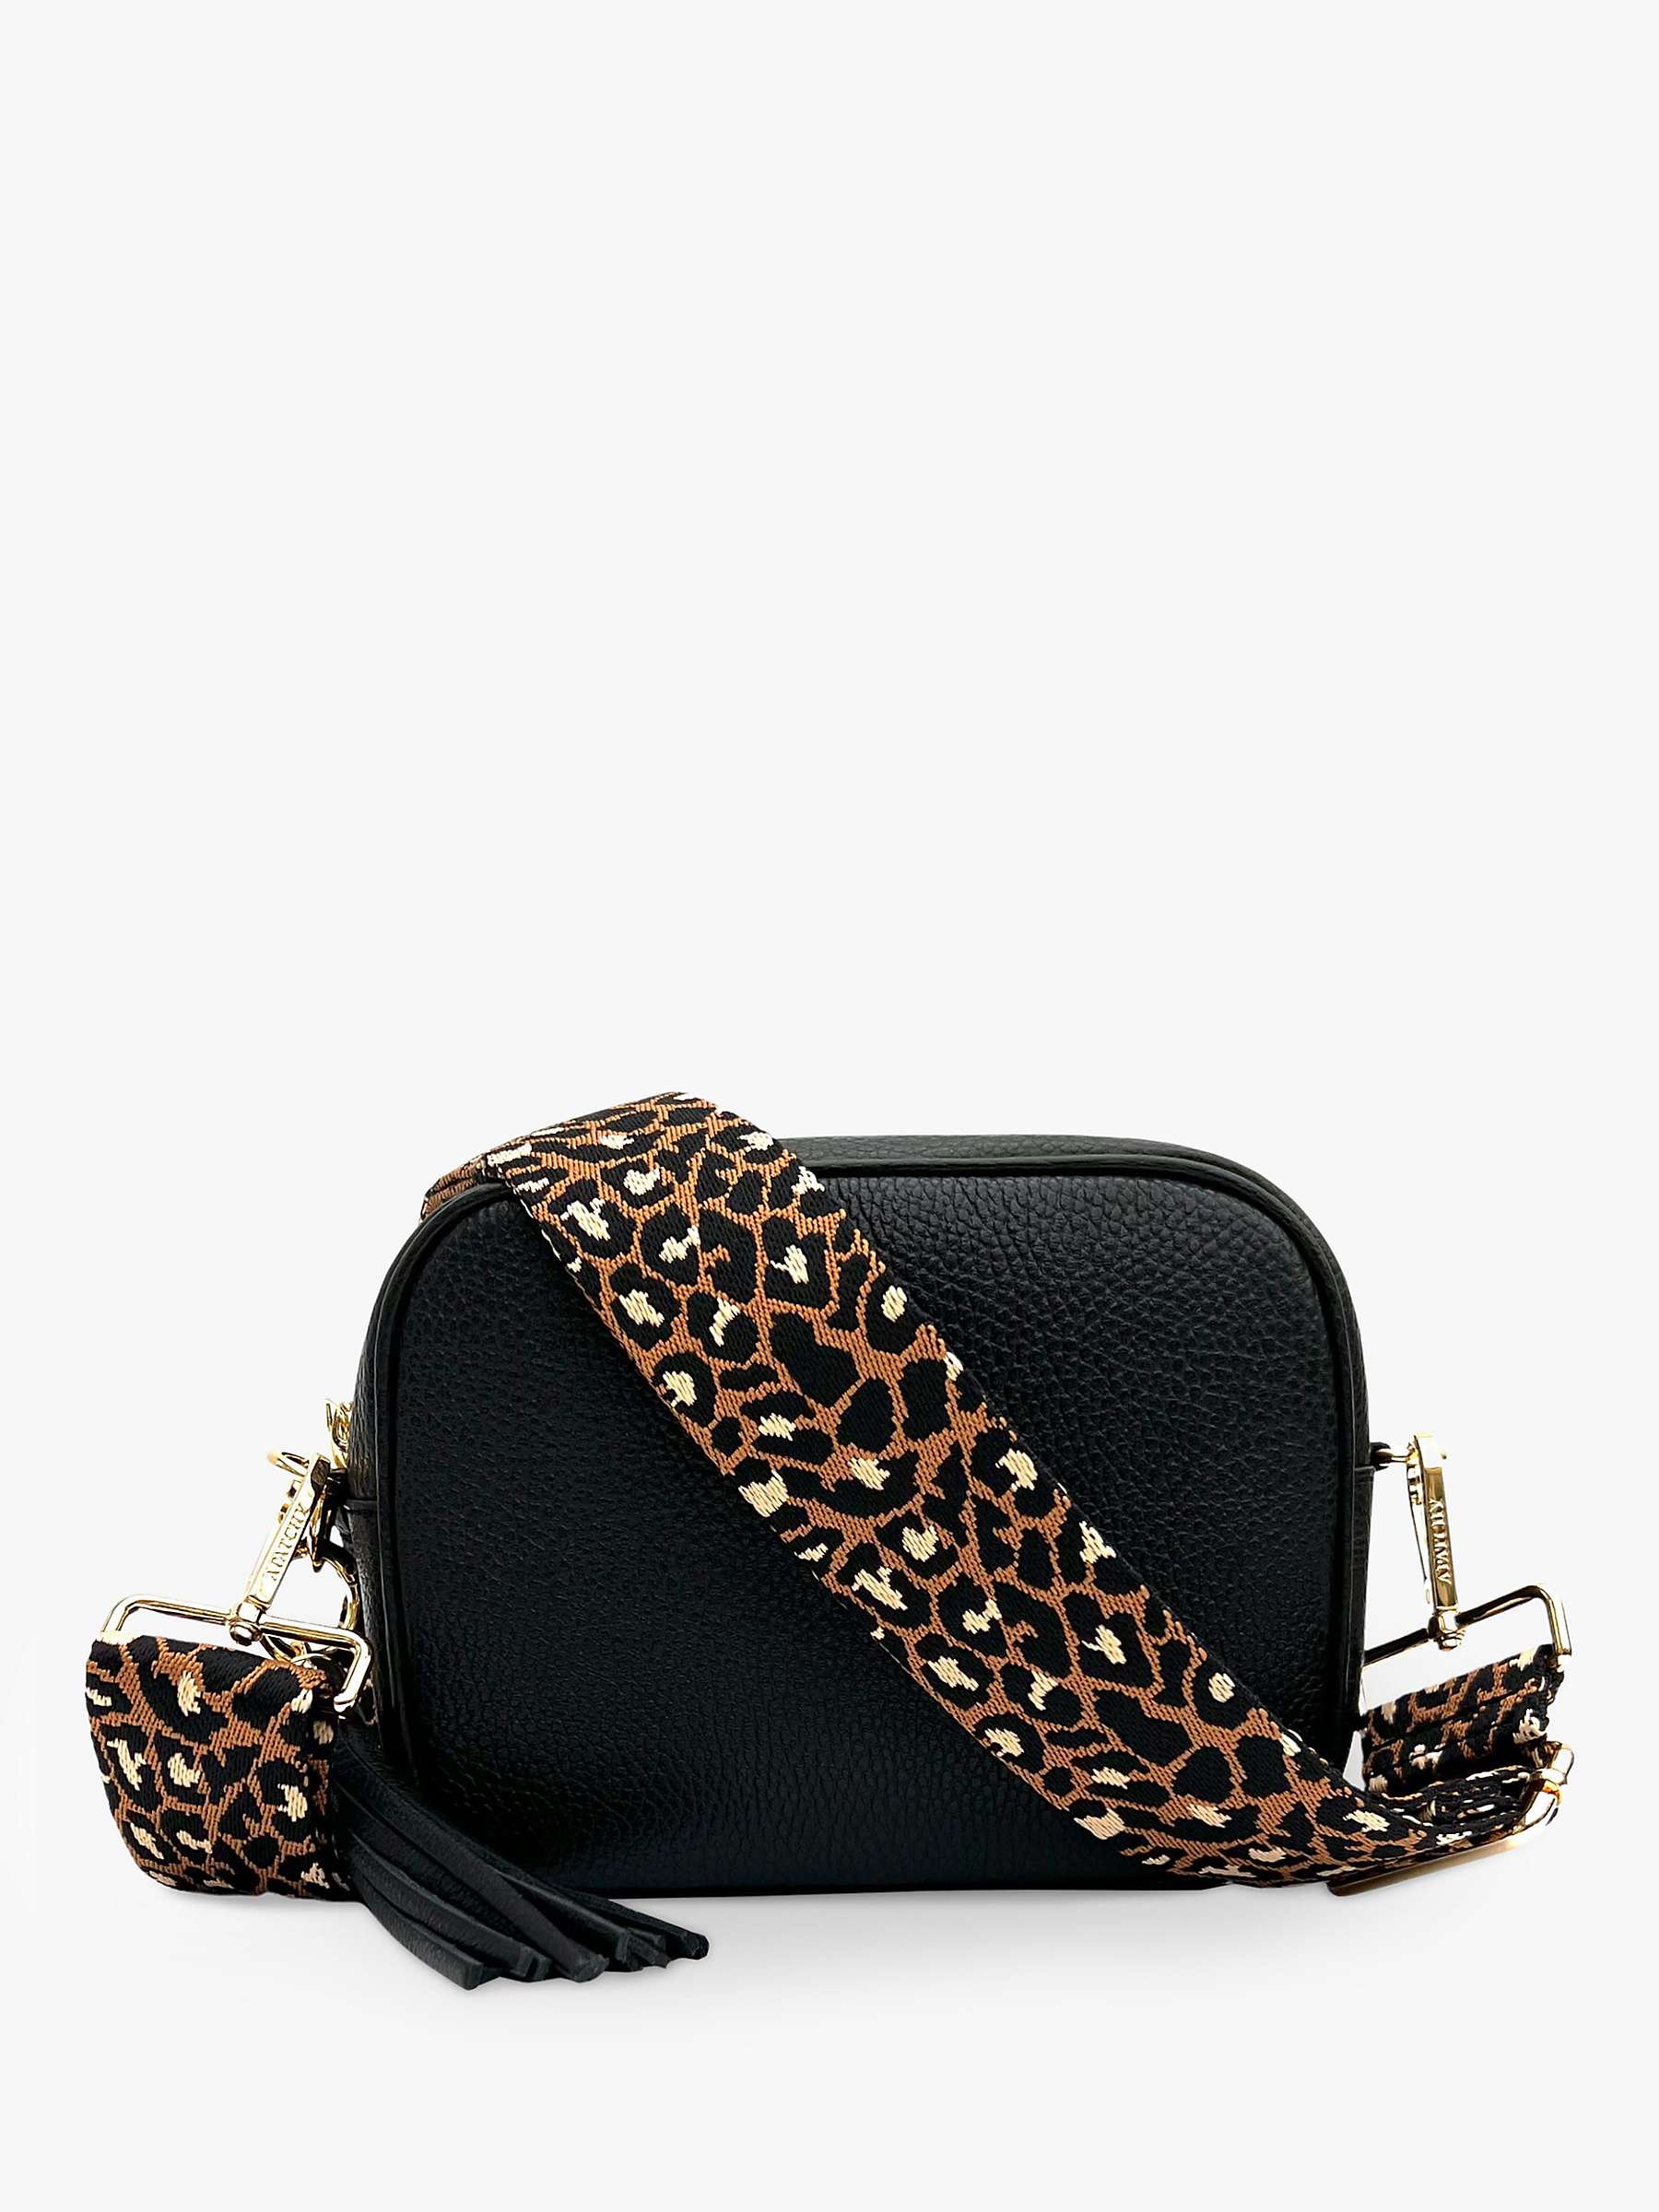 Buy Apatchy Cheetah Strap Leather Crossbody Bag Online at johnlewis.com